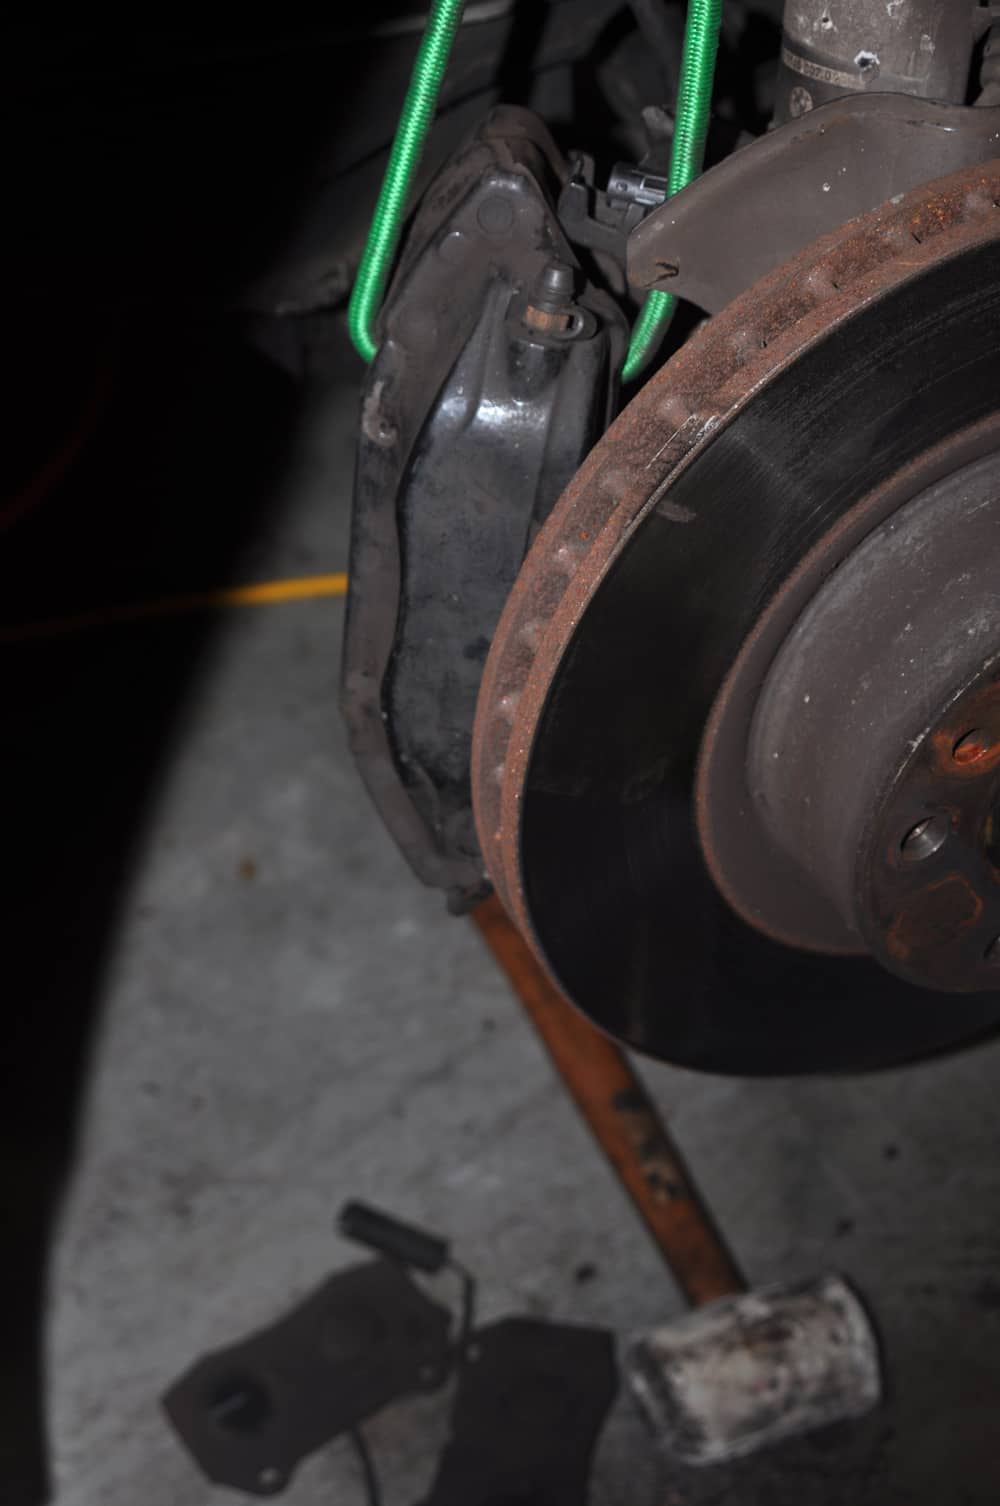 Use a bungee cord to support caliper